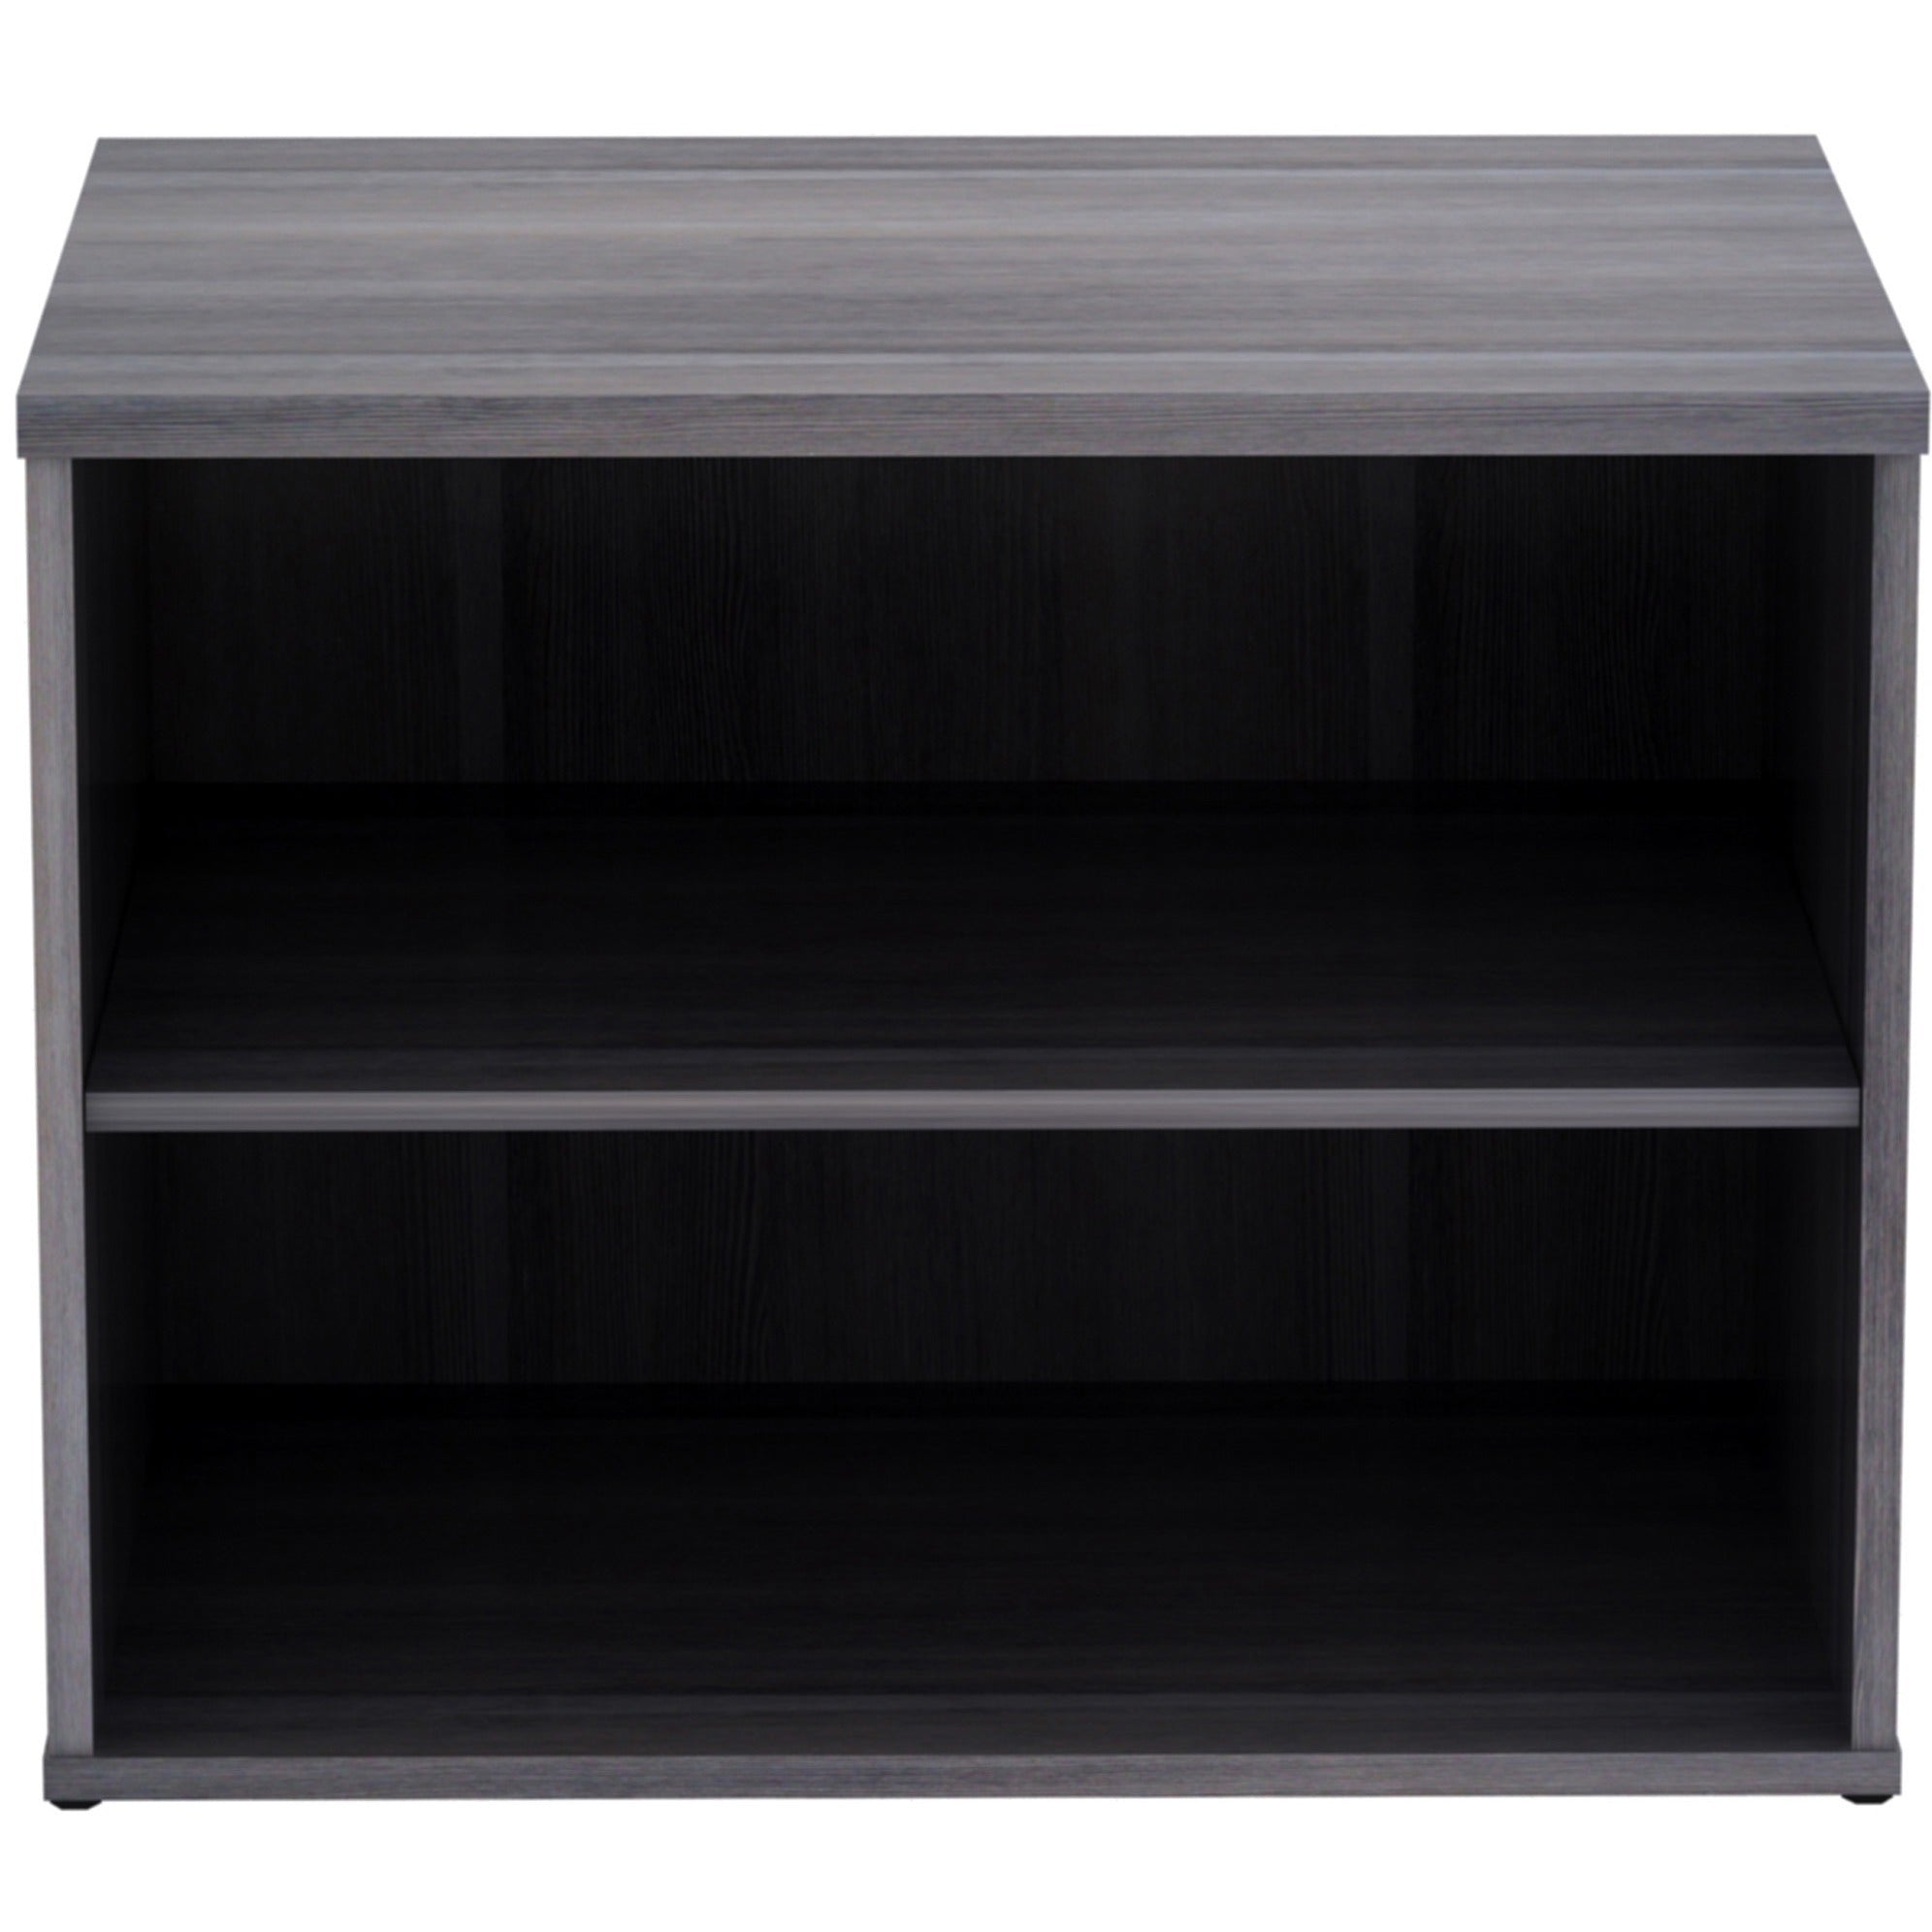 lorell-relevance-series-storage-cabinet-credenza-w-no-doors-295-x-22231-2-shelves-finish-weathered-charcoal-laminate_llr16215 - 2